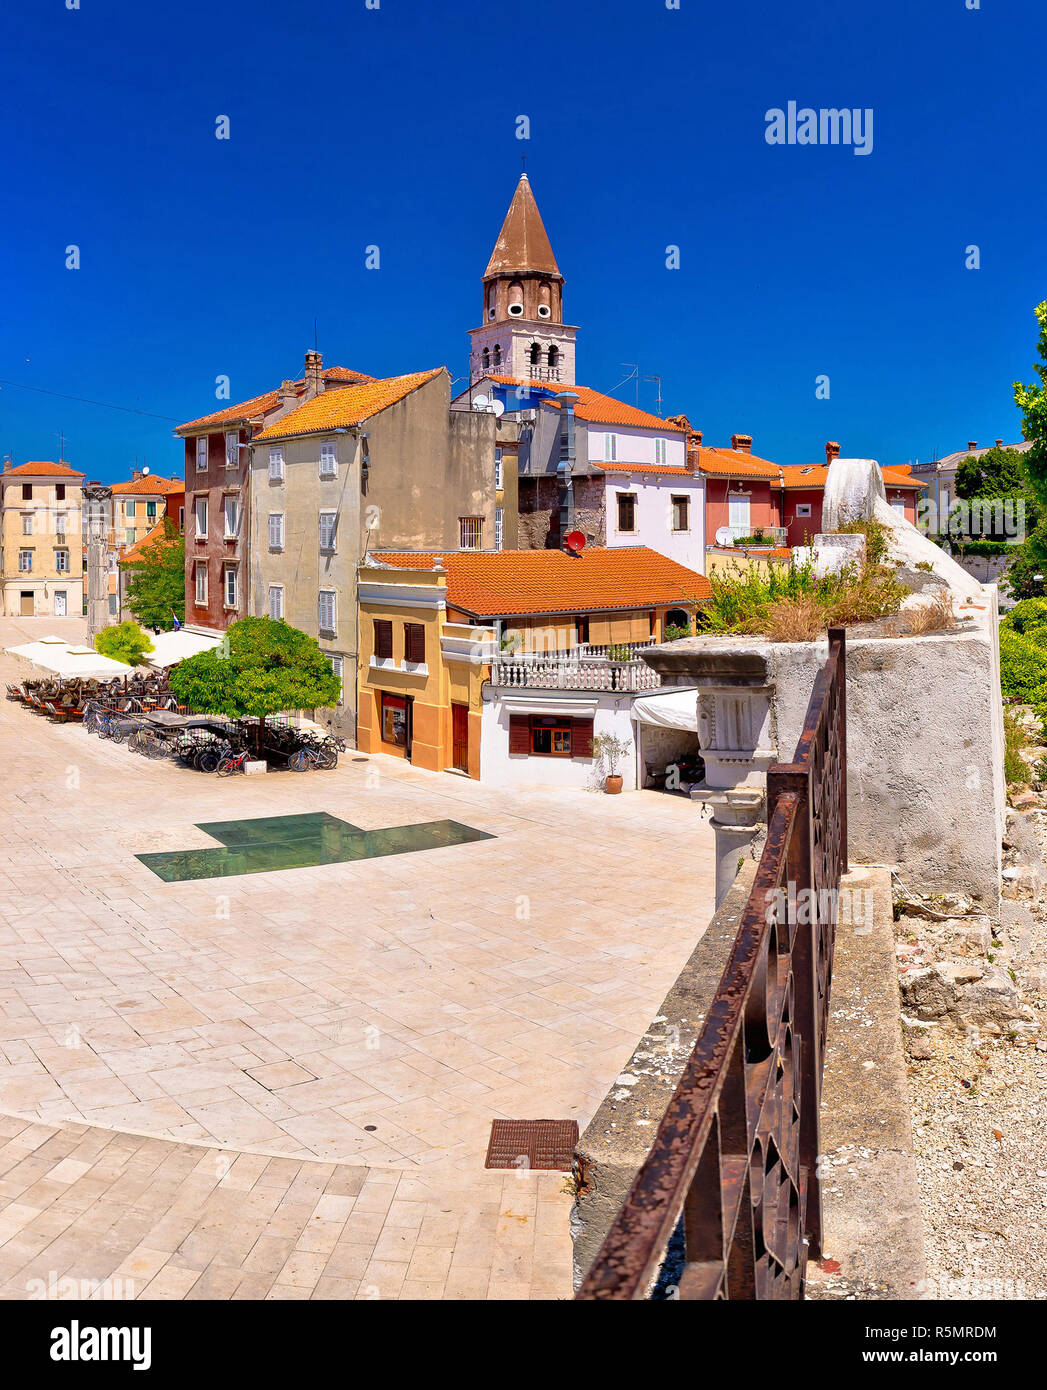 Zadar Five wells square and historic architecture panoramic view Stock Photo